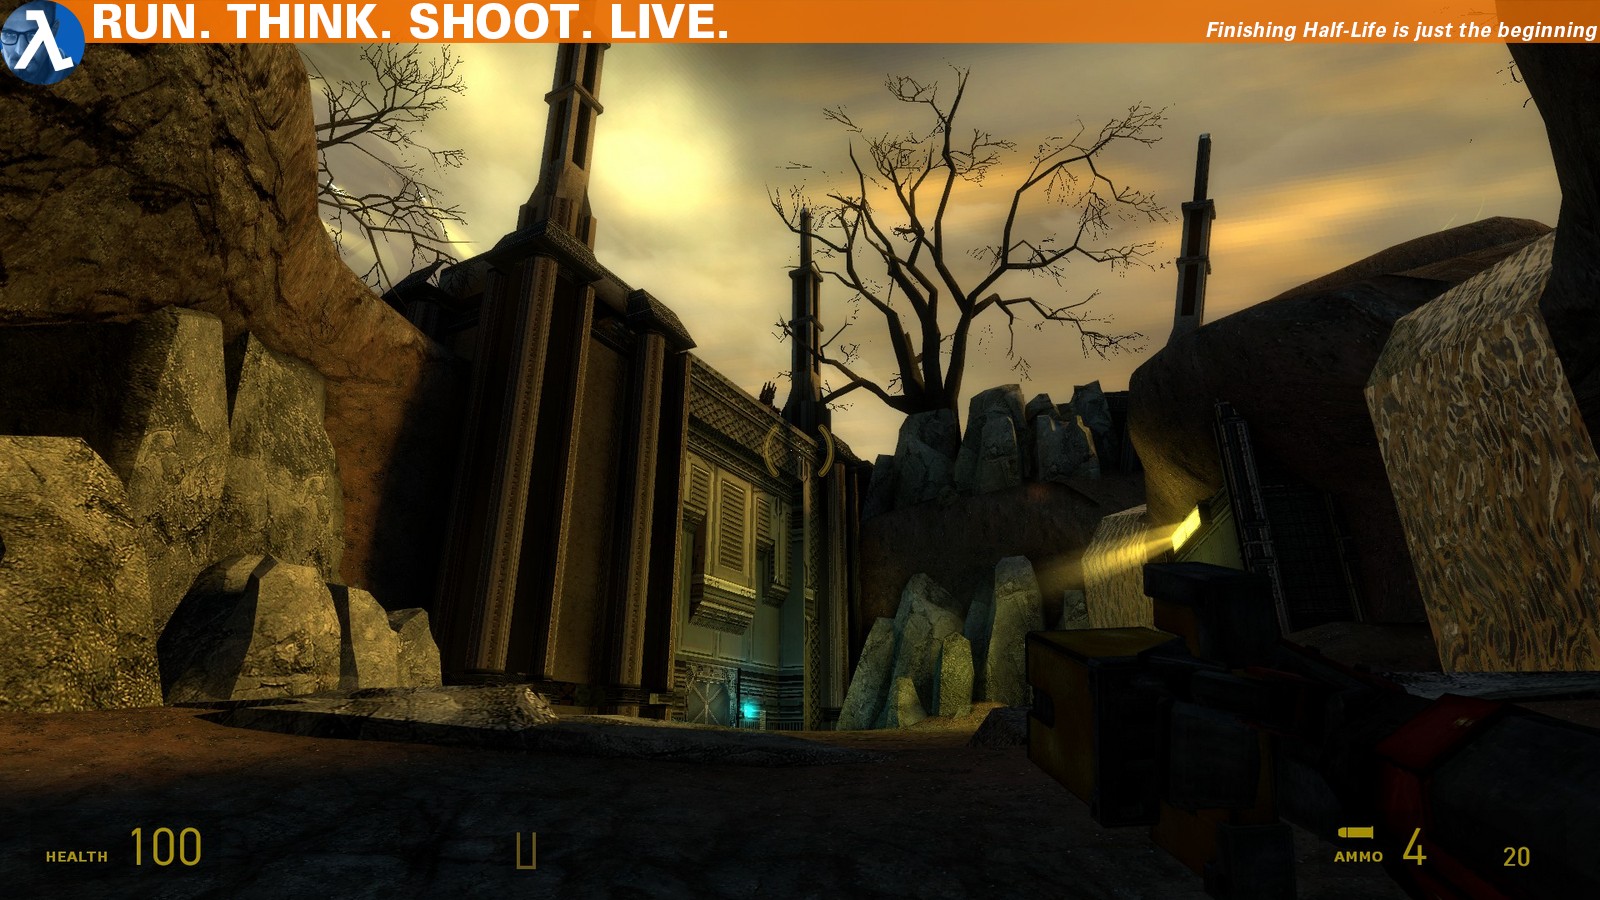 Half-Life 2: Episode 1 & 2 - Gameplay 4 - High quality stream and